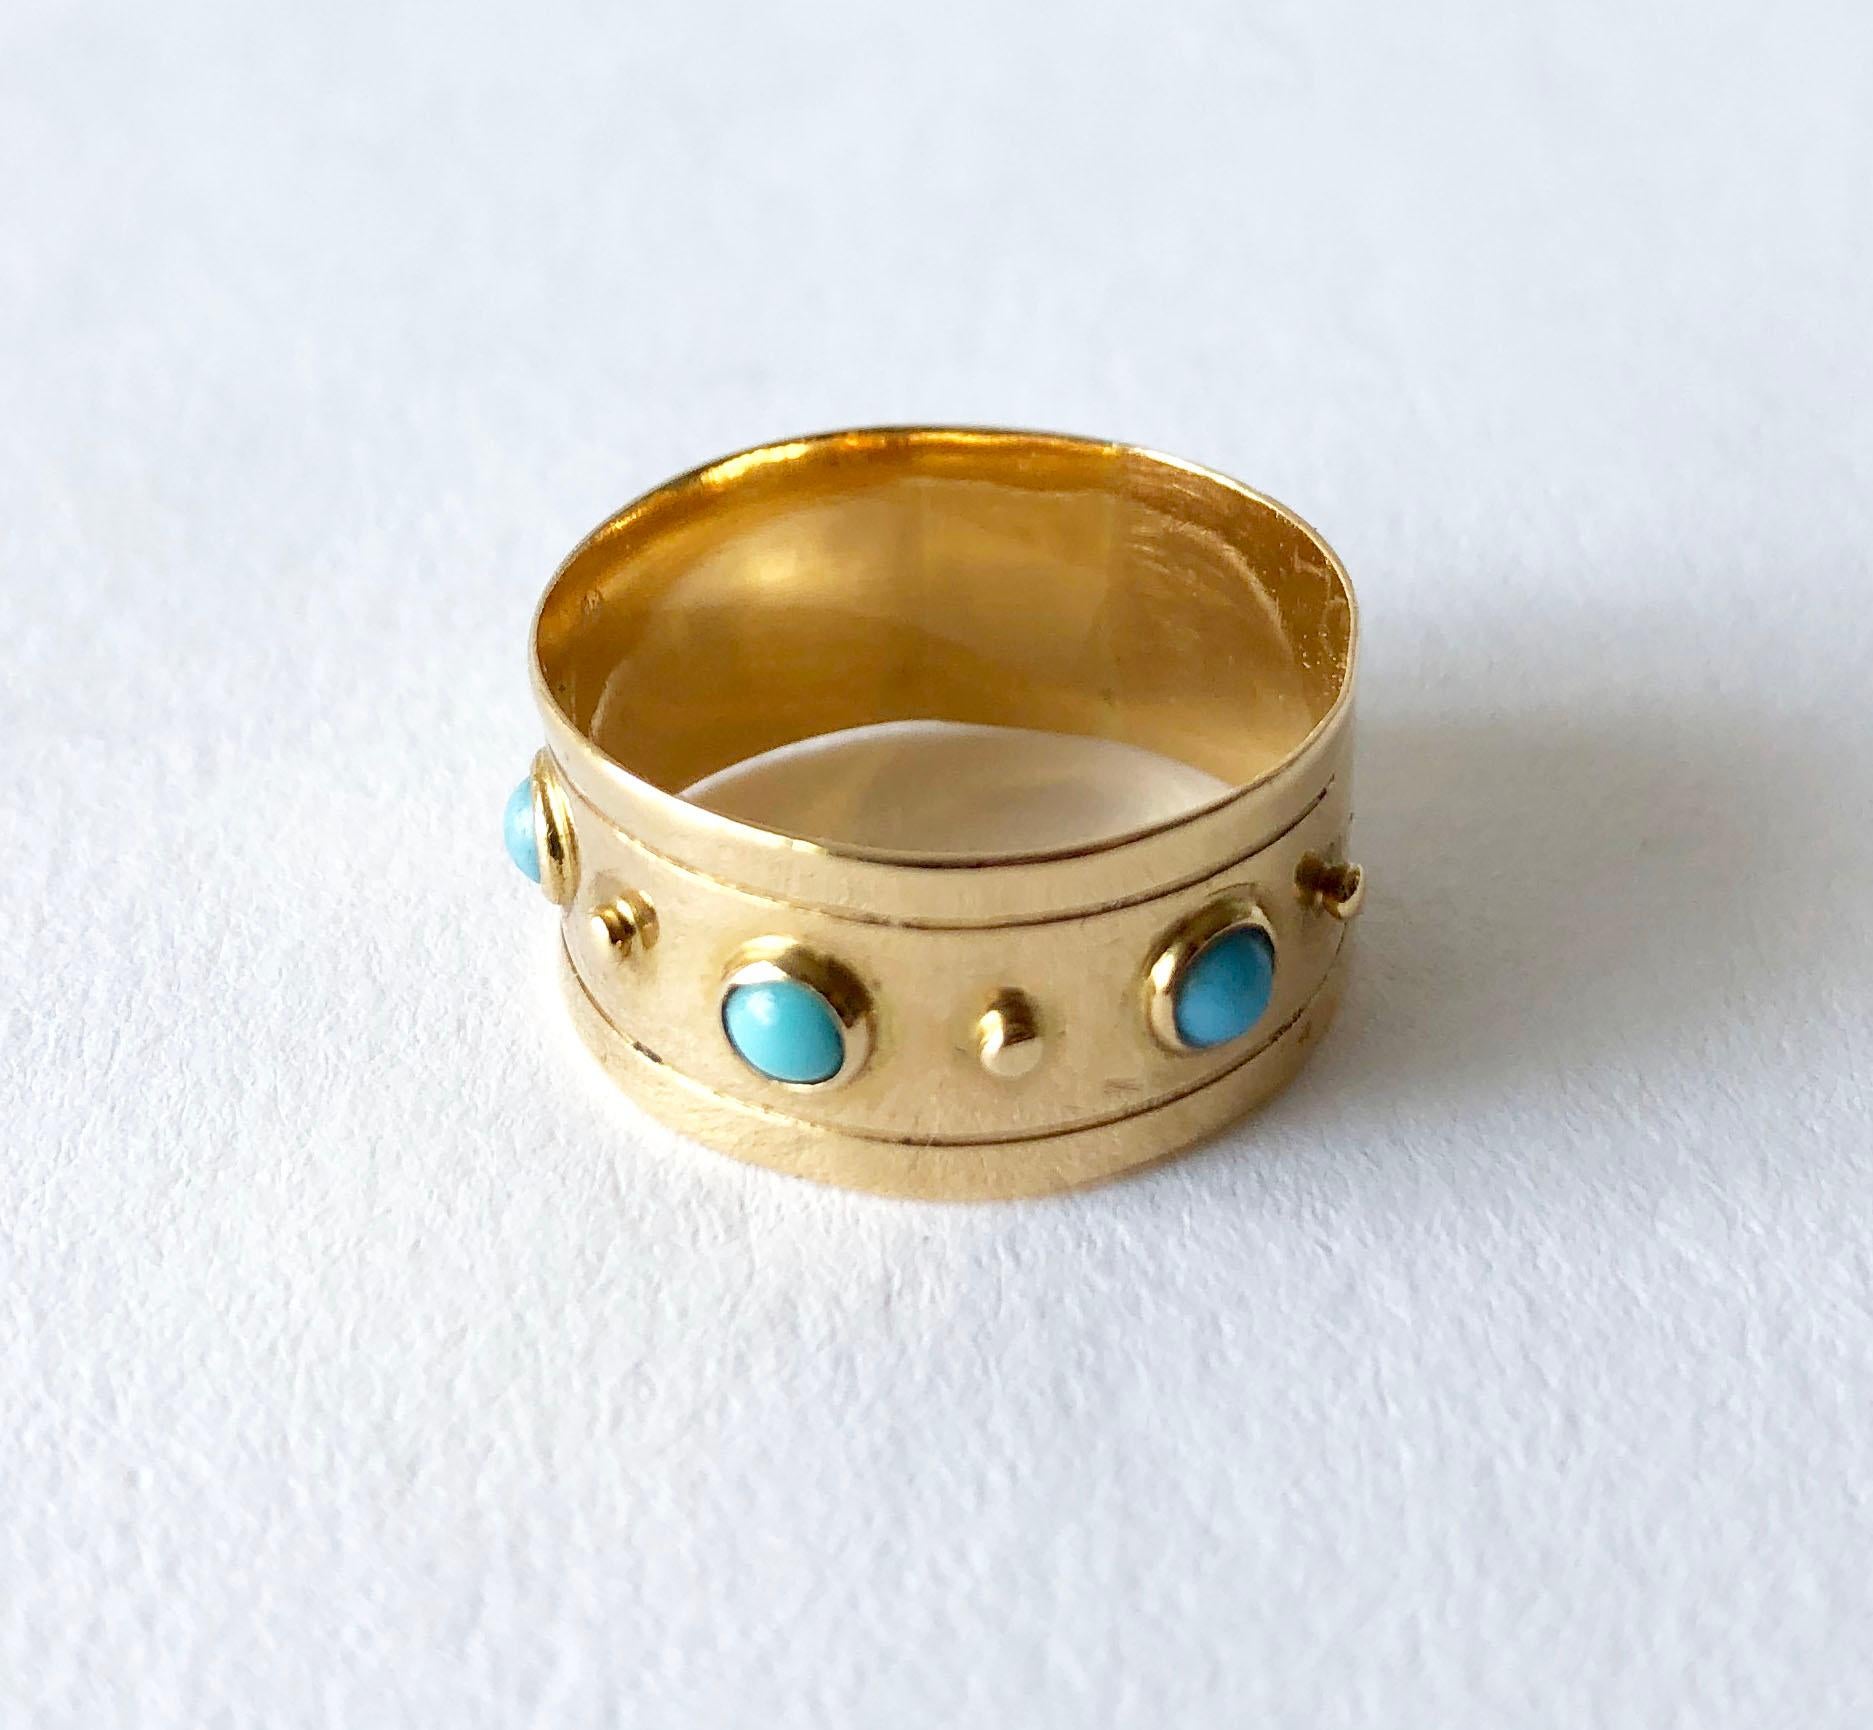 Rare, 18K gold studded ring with Persian turquoise cabochons created by Stig Engelbert of Sweden. 
Ateljé Stigbert was founded in the early 1940's and produced Swedish modernist jewelry. 
Ring is a finger size 7 and is 3.8